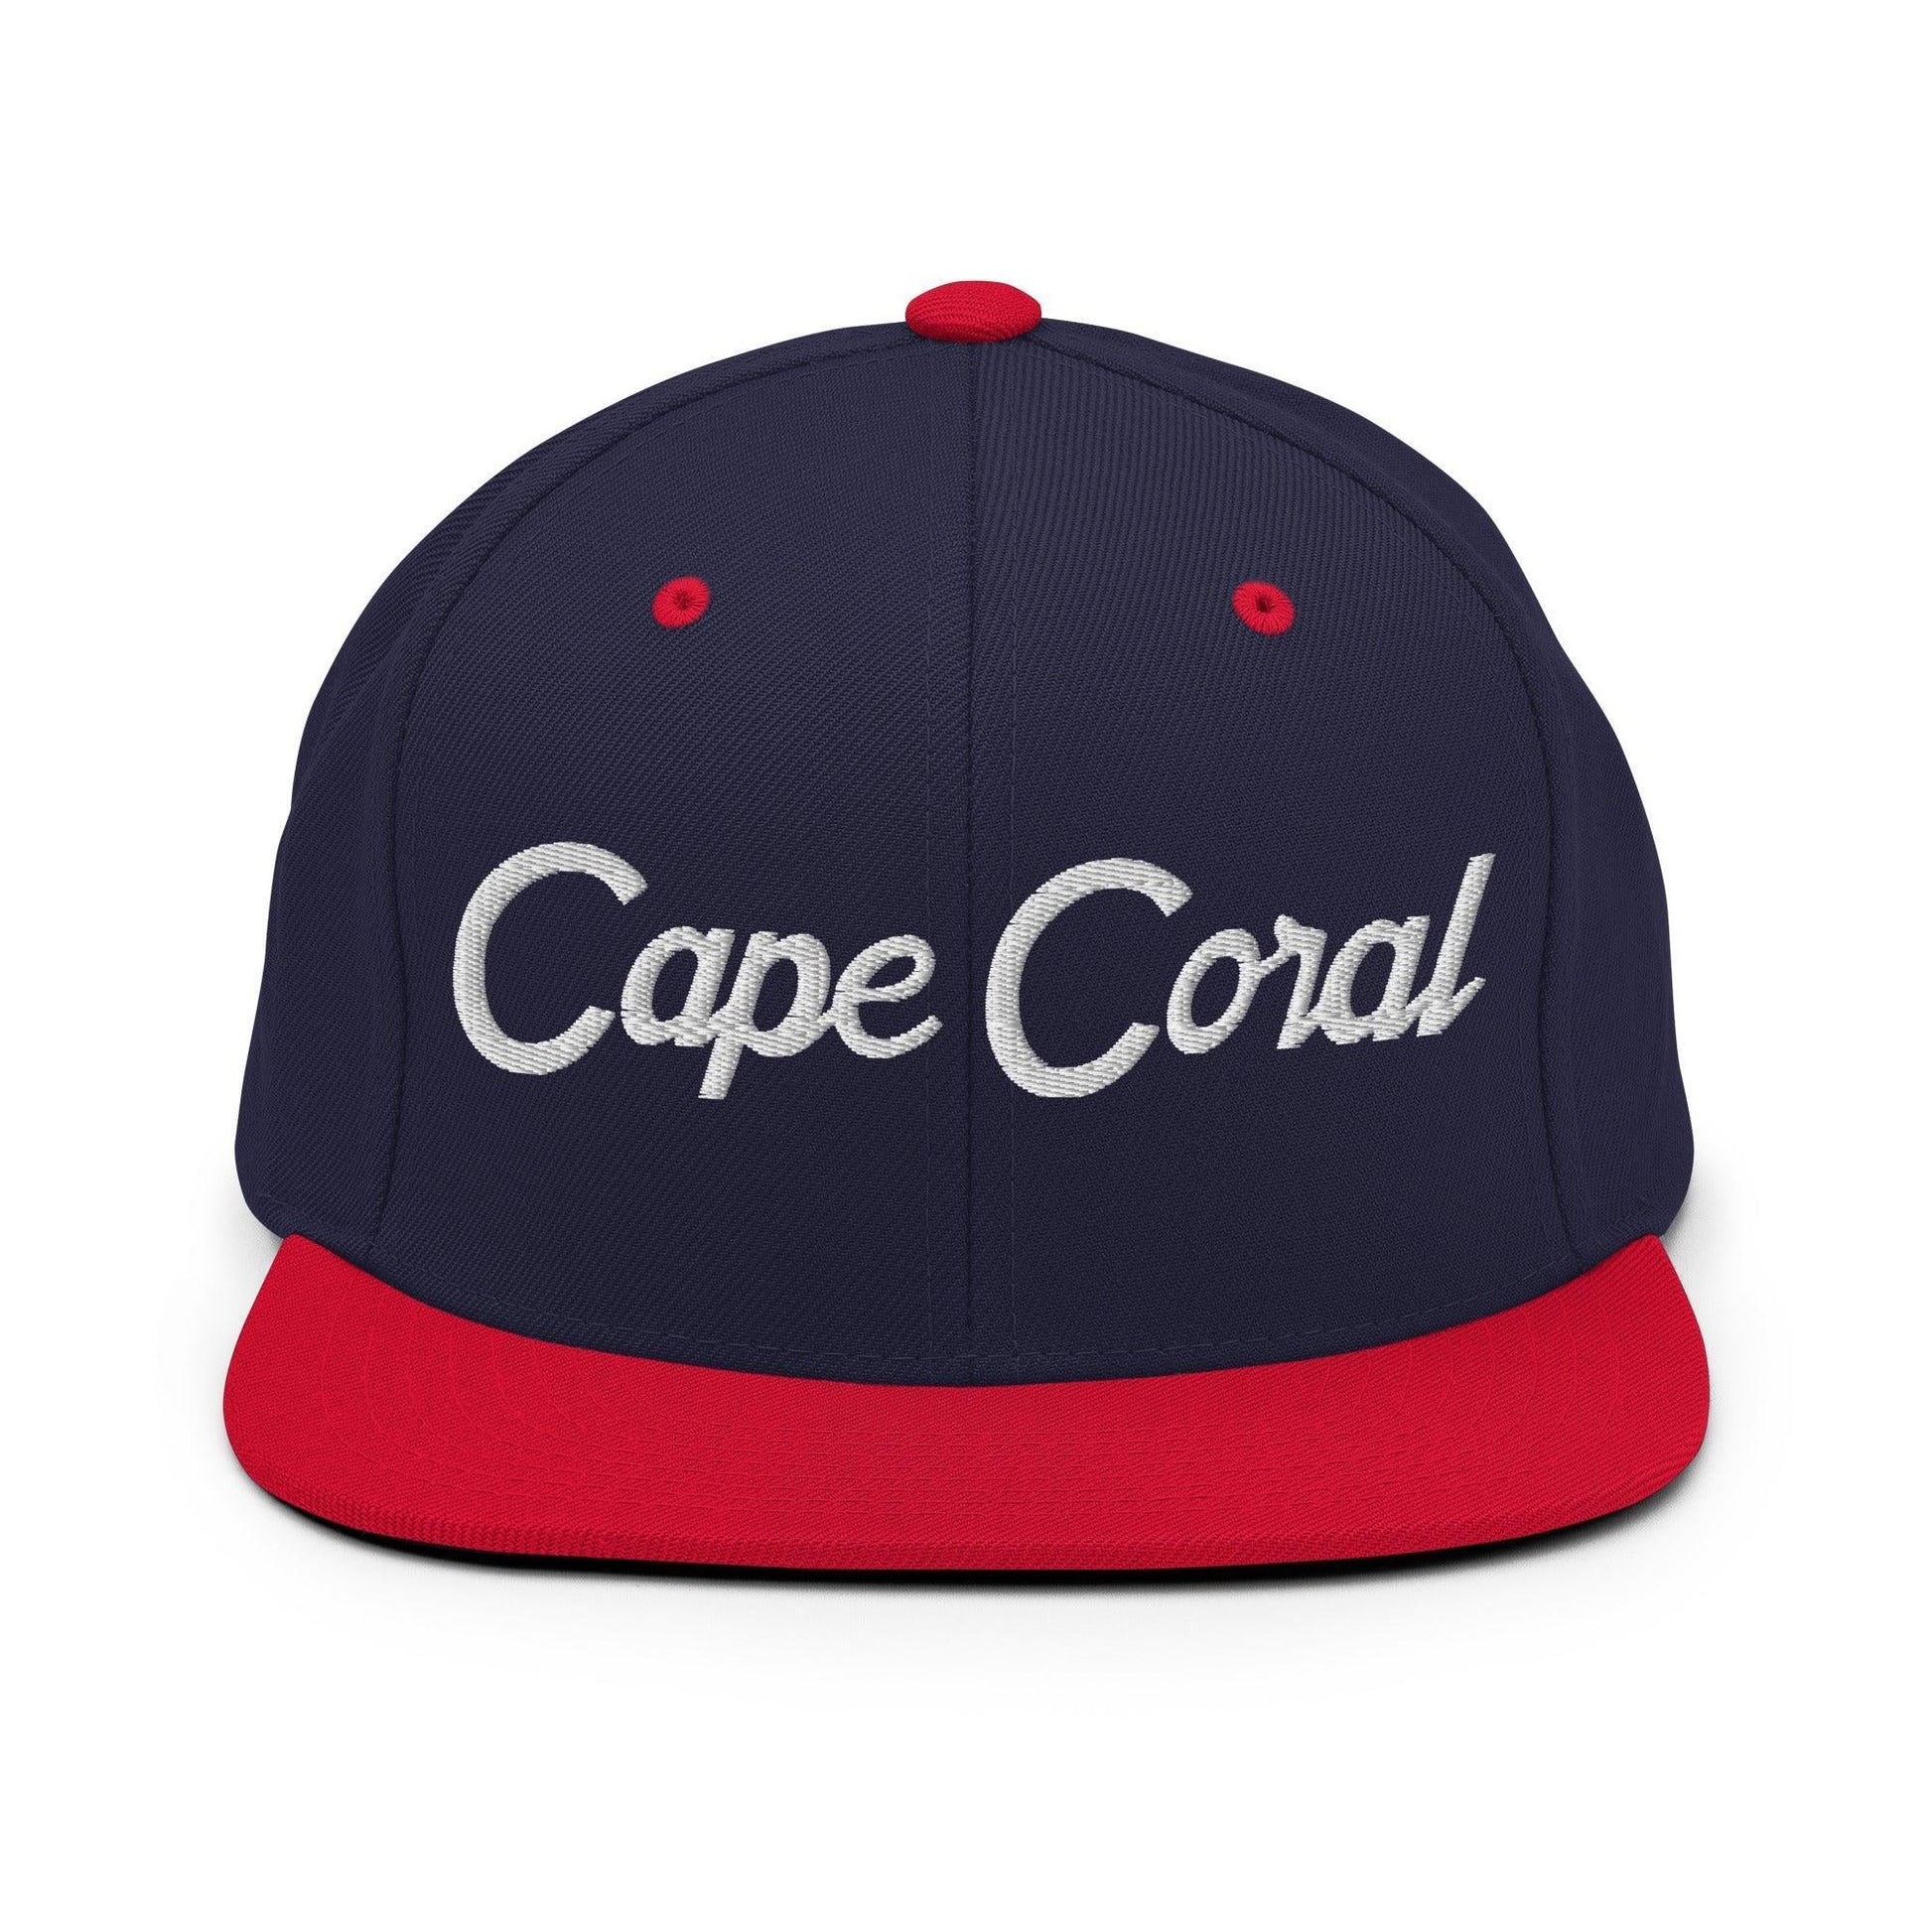 Cape Coral Script Snapback Hat Navy/ Red